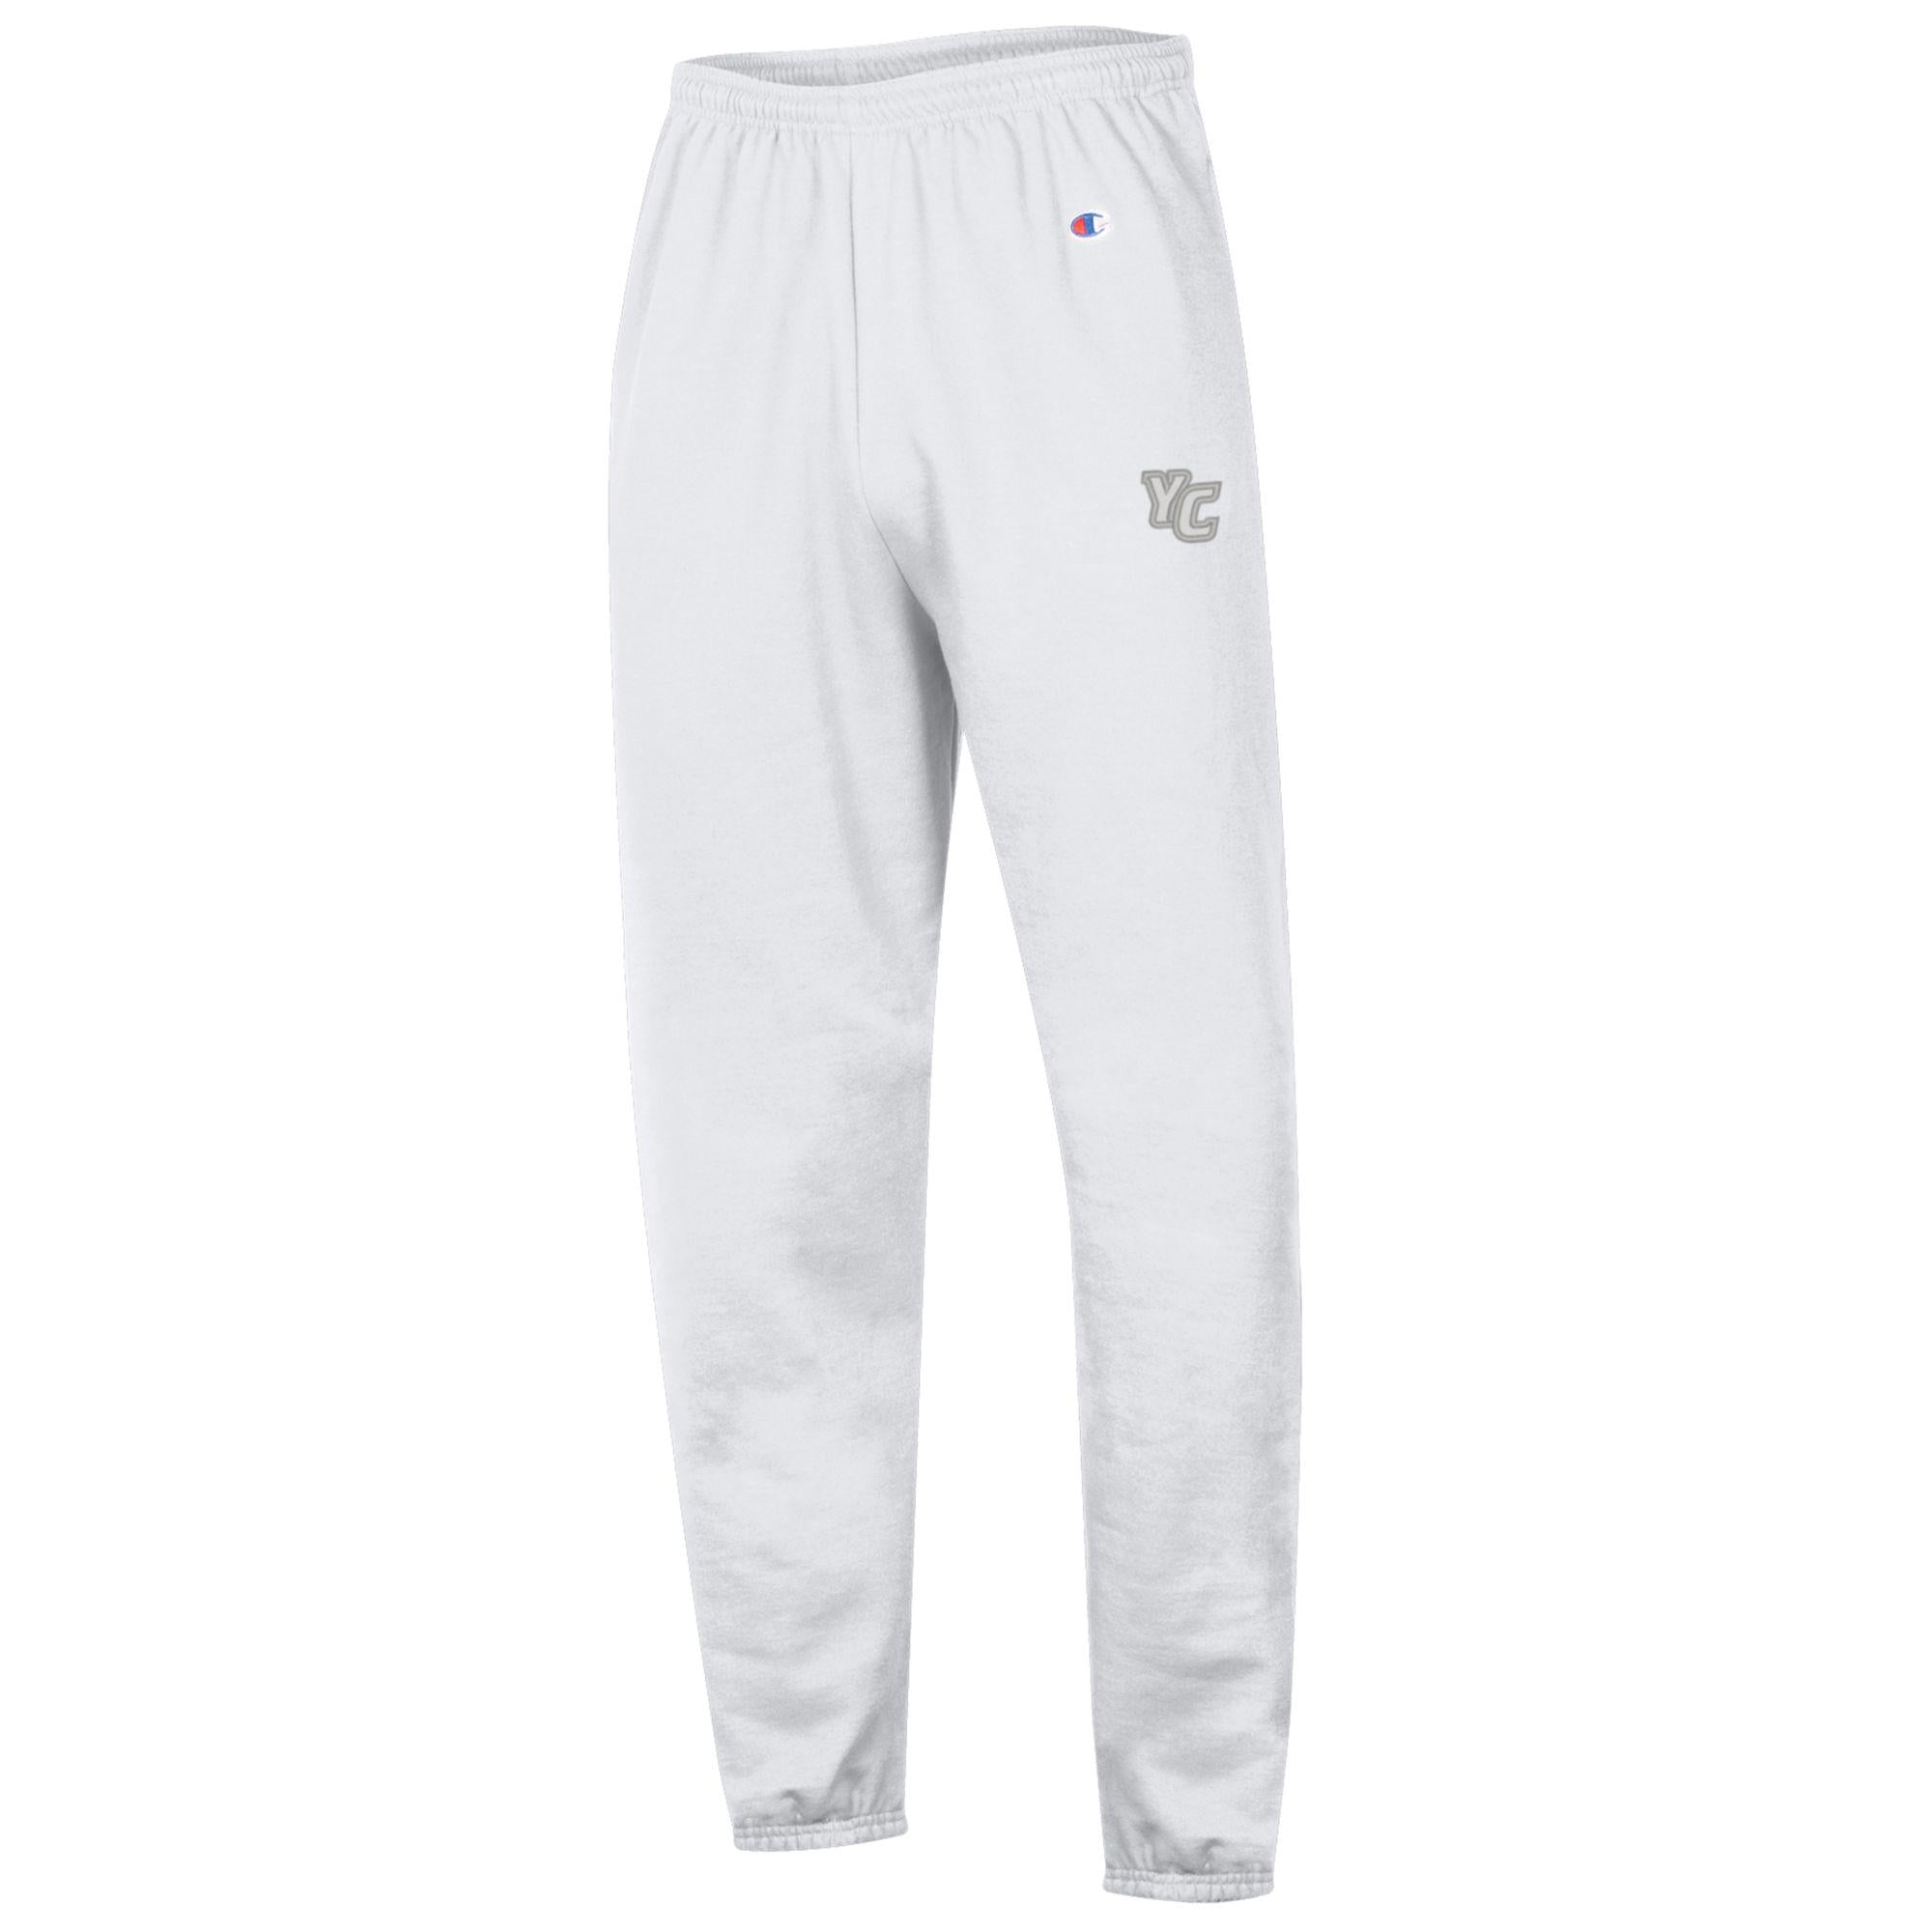 CHAMPION MATCHING SET CLOSED BOTTOM SWEATPANT WITH EMBROIDERY